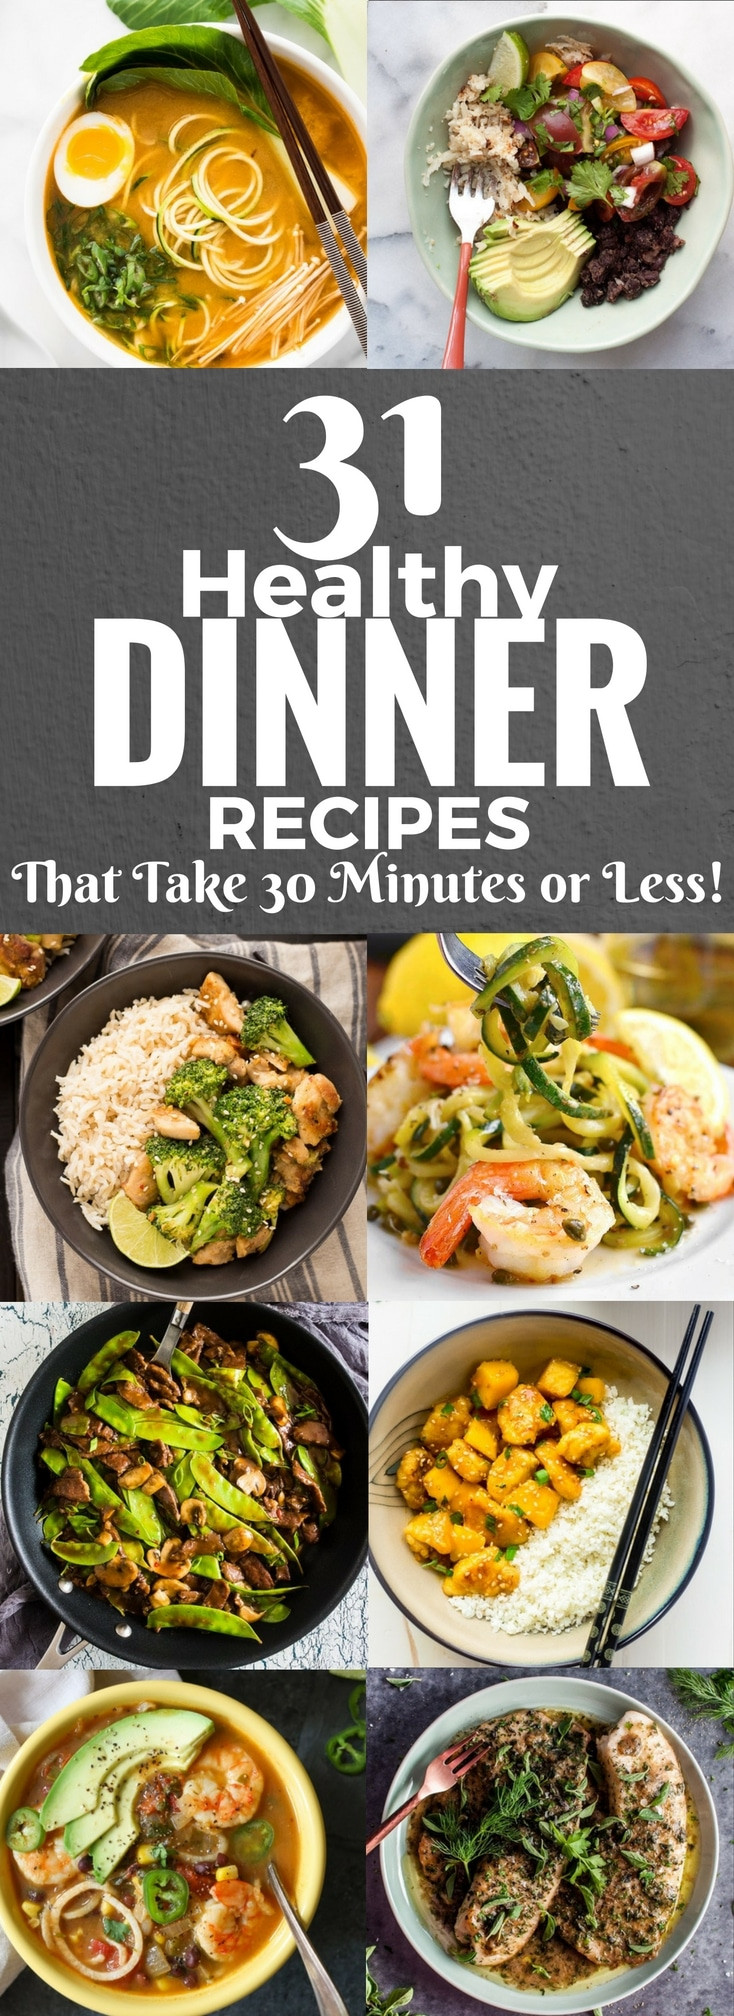 Healthy Diet Dinners
 31 Healthy Dinner Recipes That Take 30 Minutes or Less